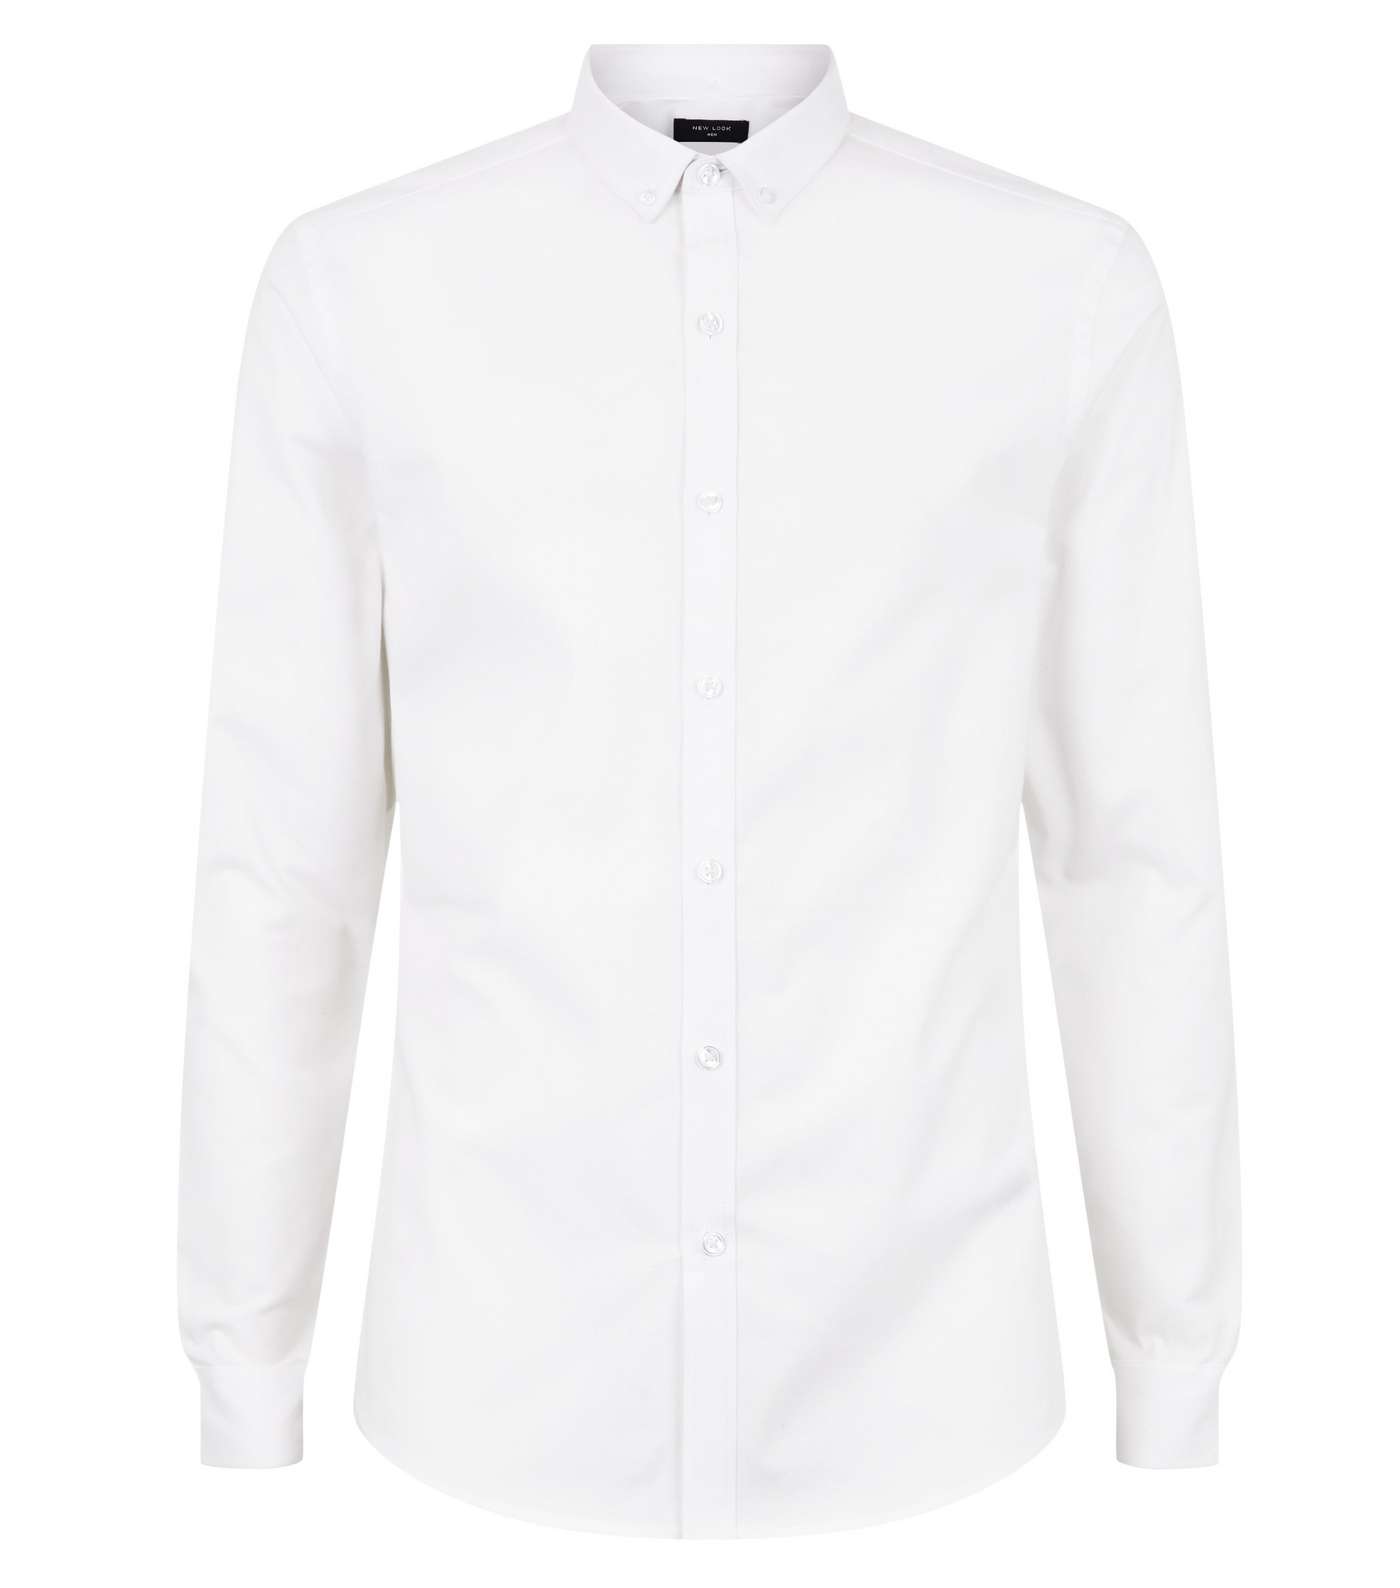 White Muscle Fit Long Sleeve Oxford Shirt Image 3